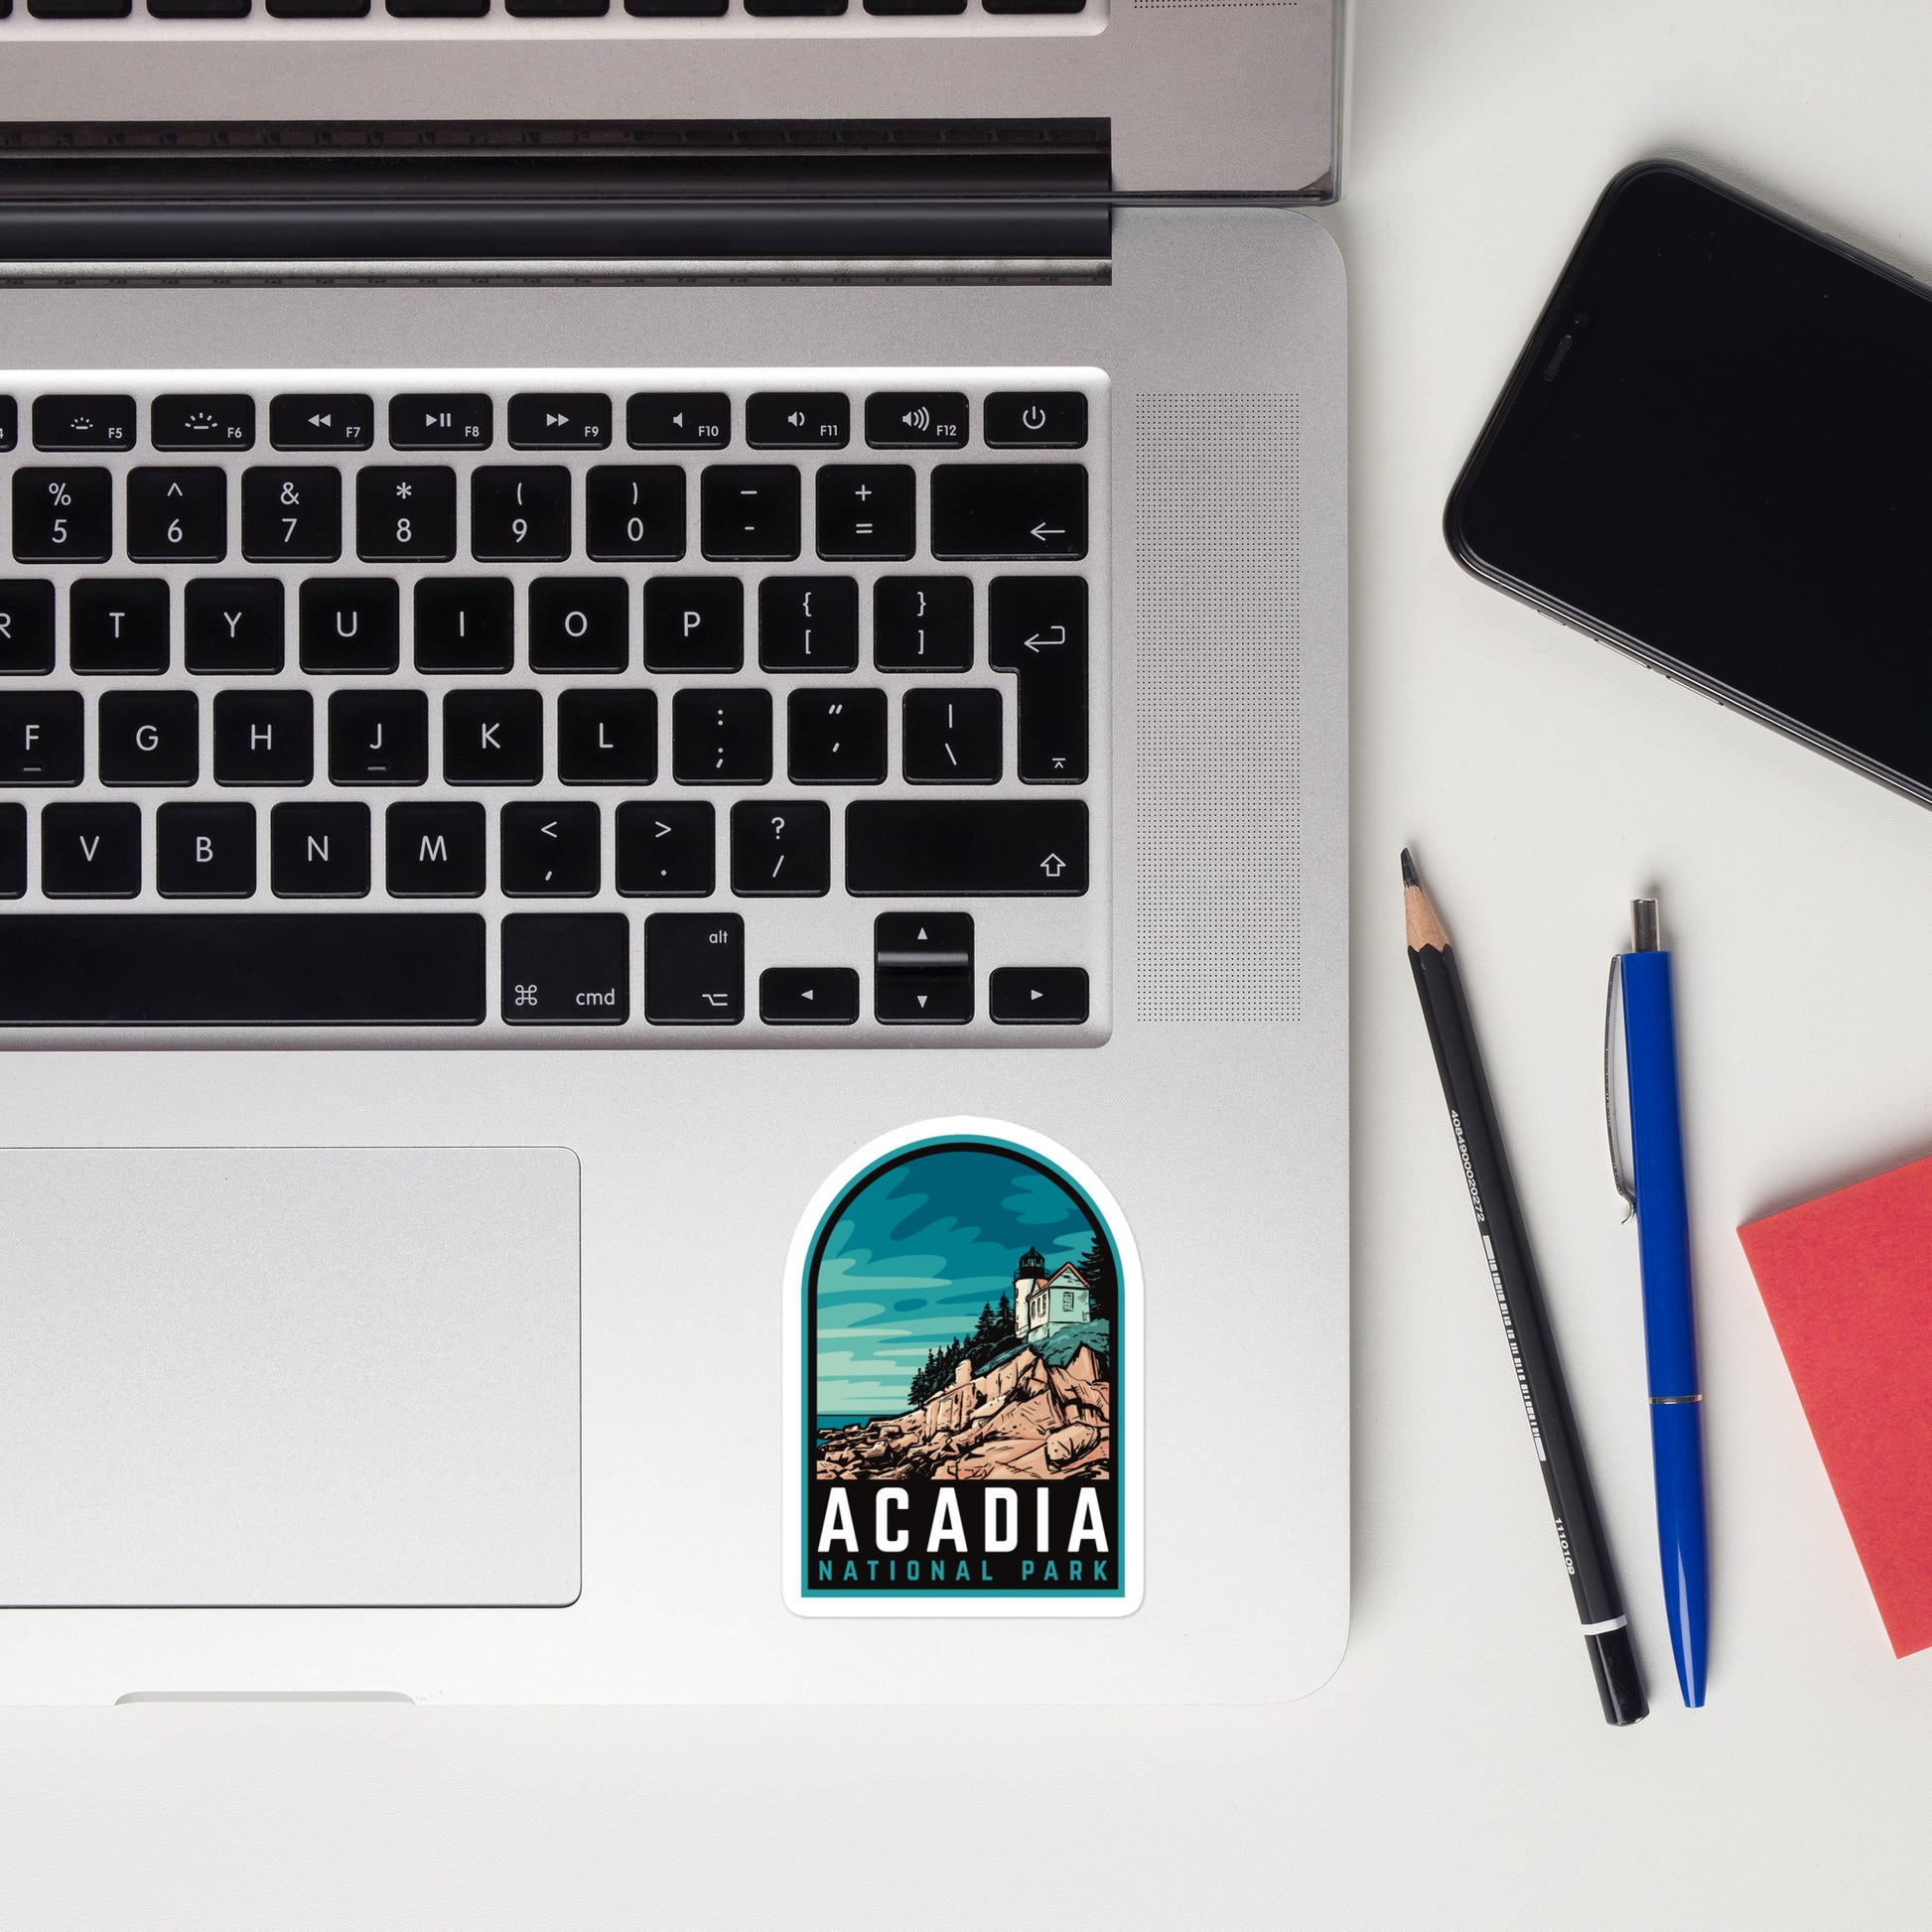 A 3 inch tall sticker of Acadia National Park on a laptop